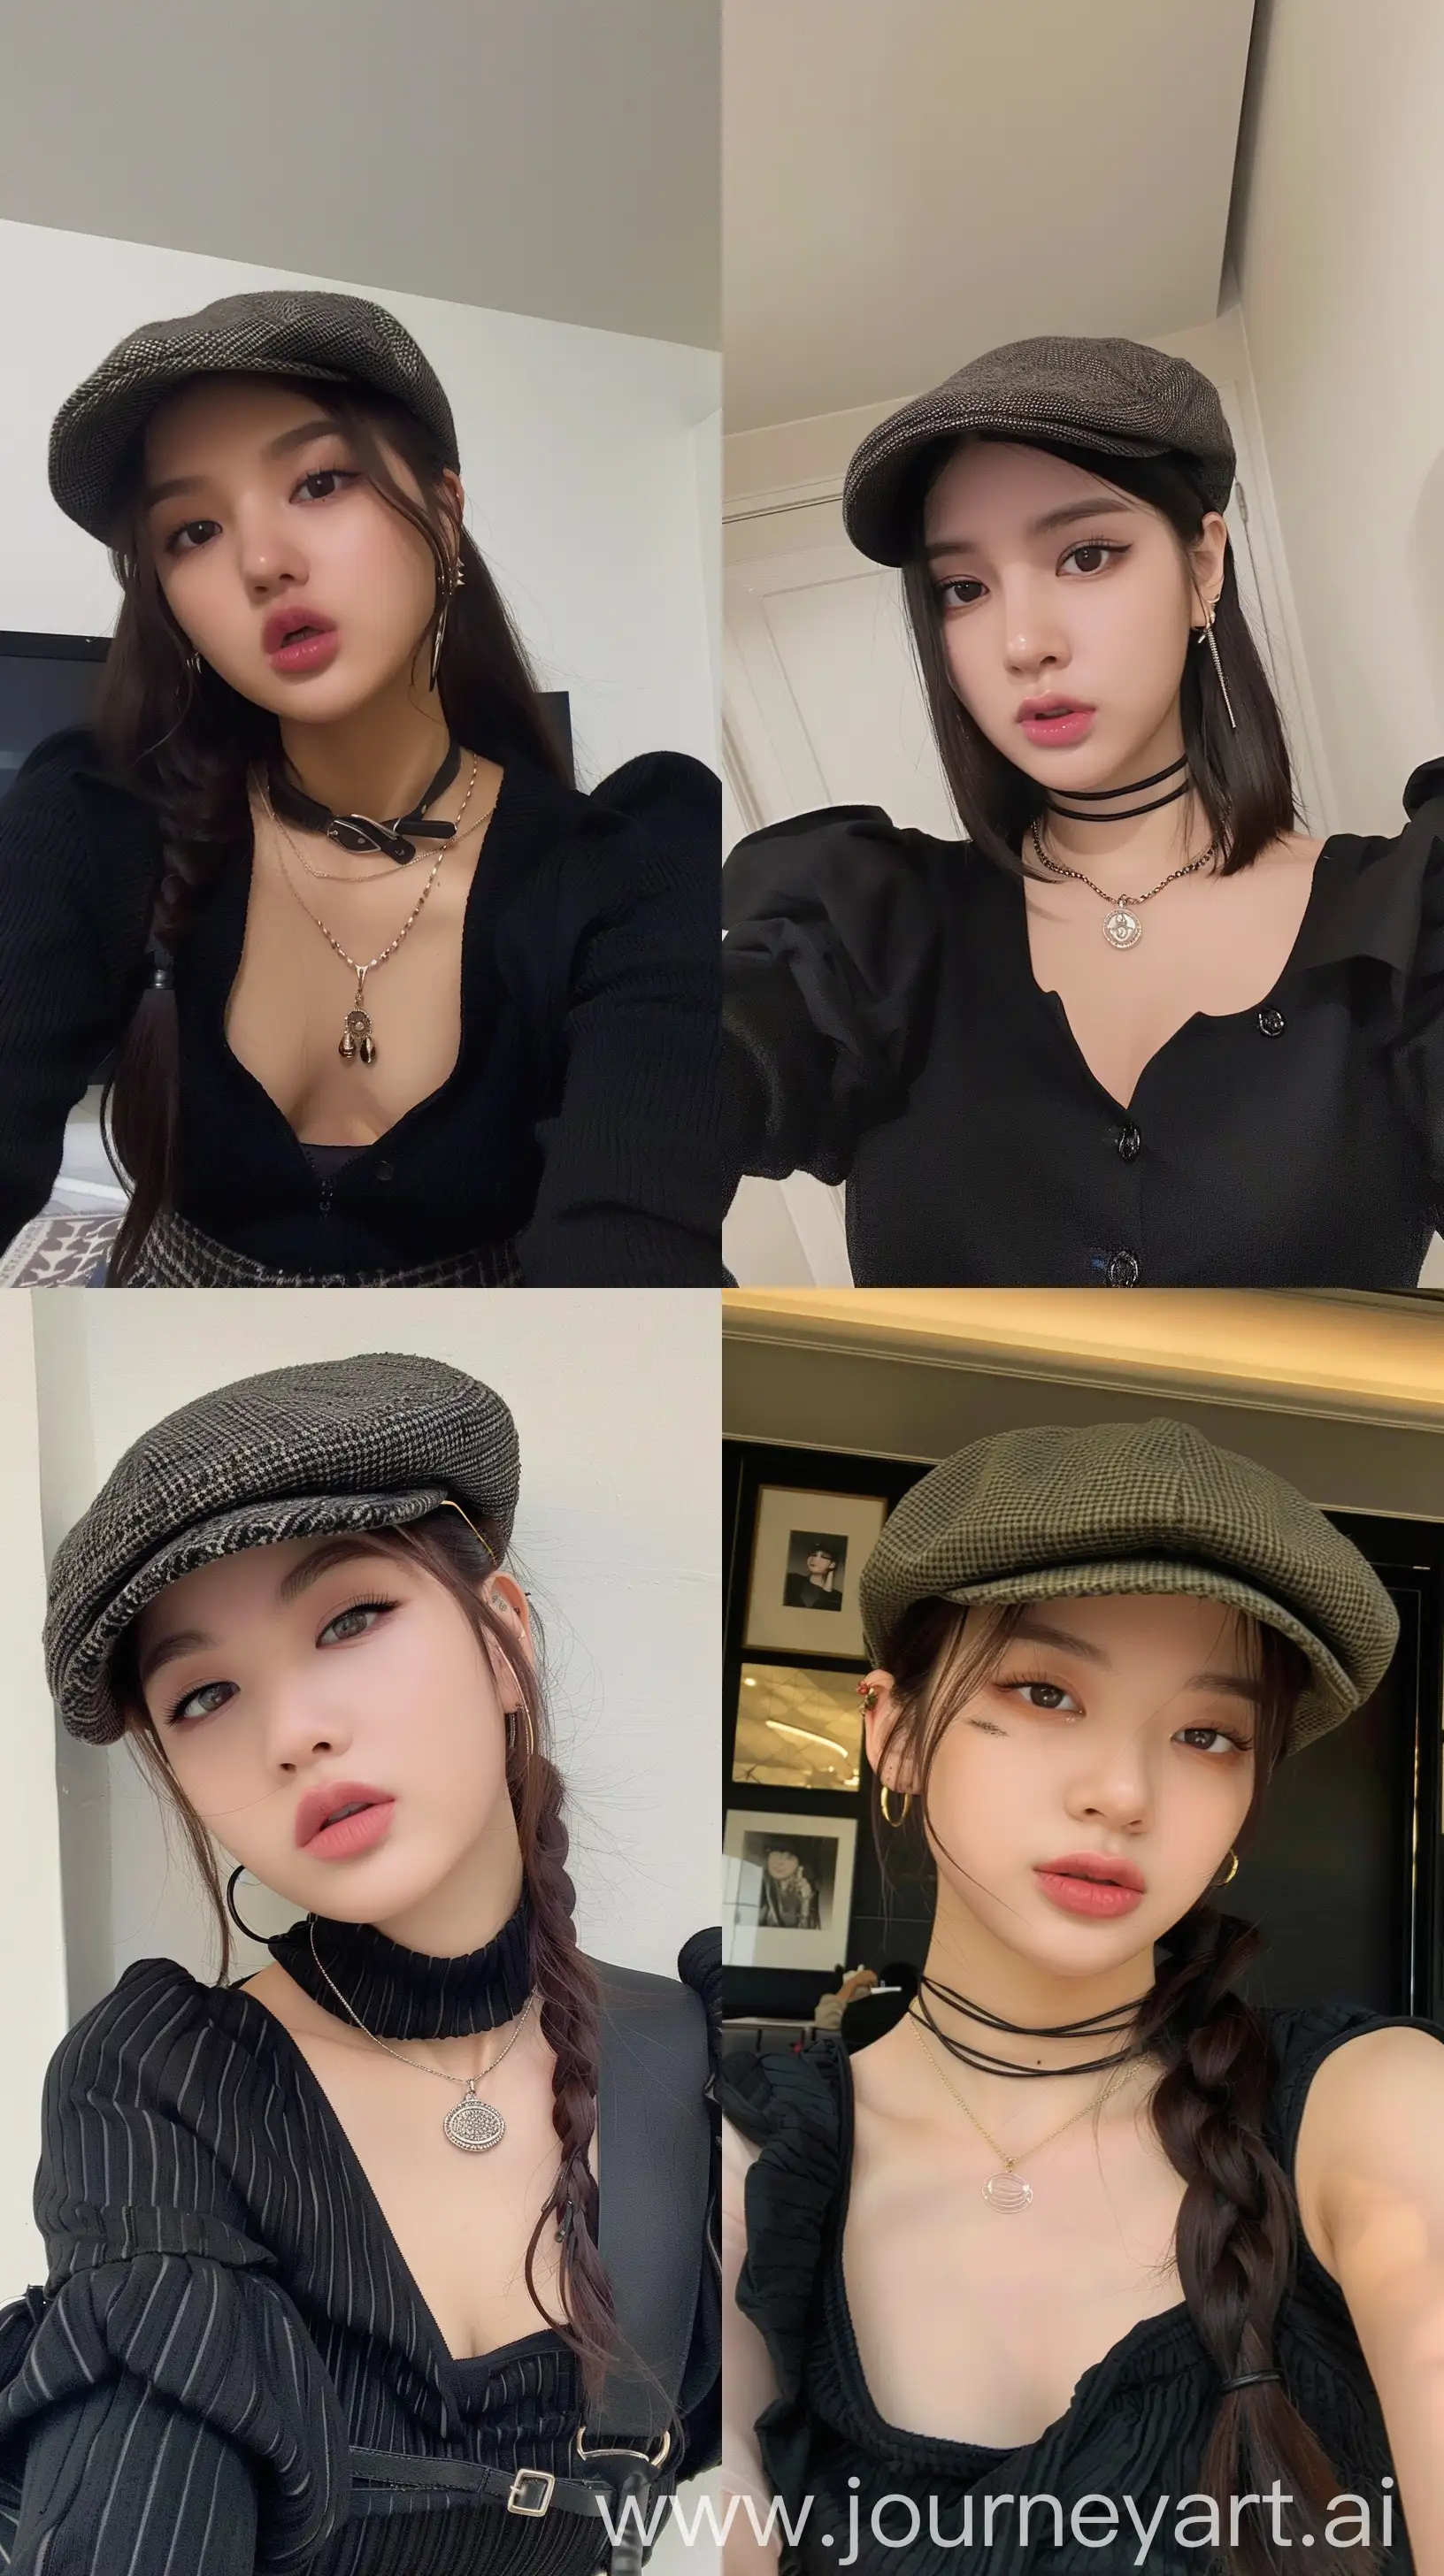 Blackpinks-Jennie-Selfie-in-Stylish-Black-Clothes-and-Aesthetic-Makeup